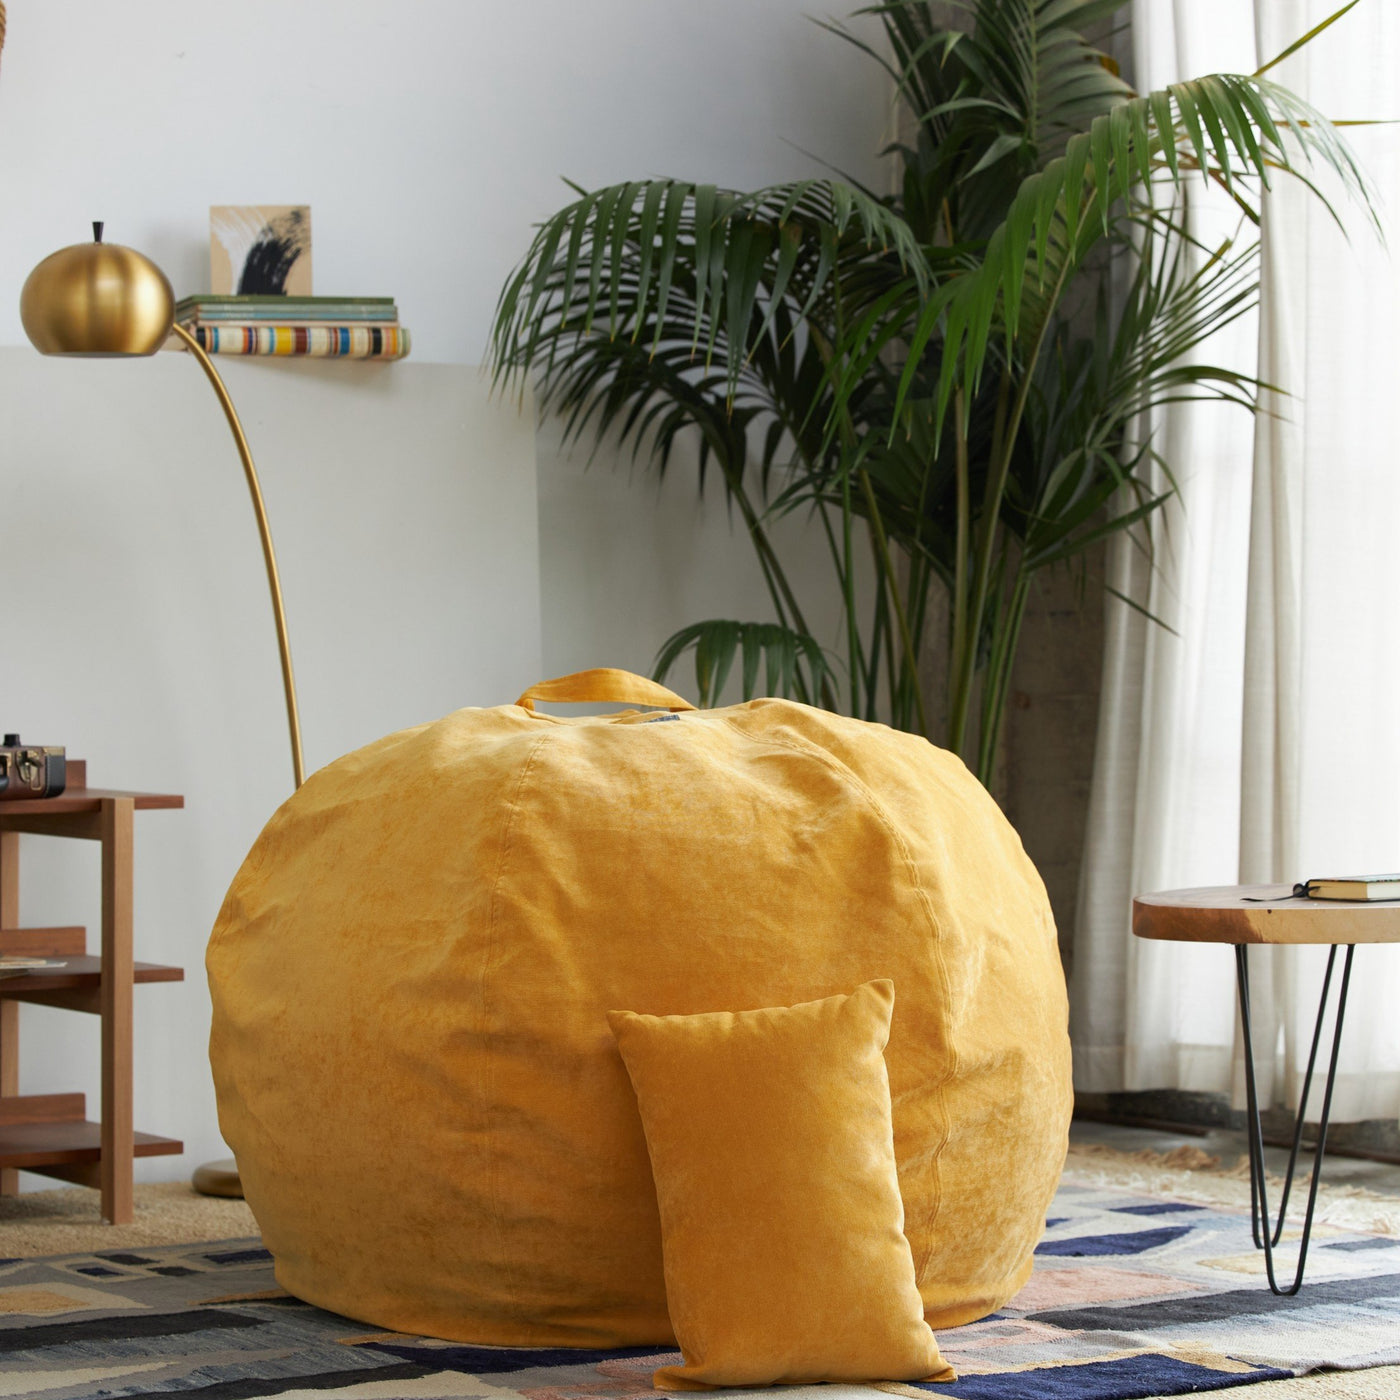 The Big Beanbag Company pioneers compostable filling